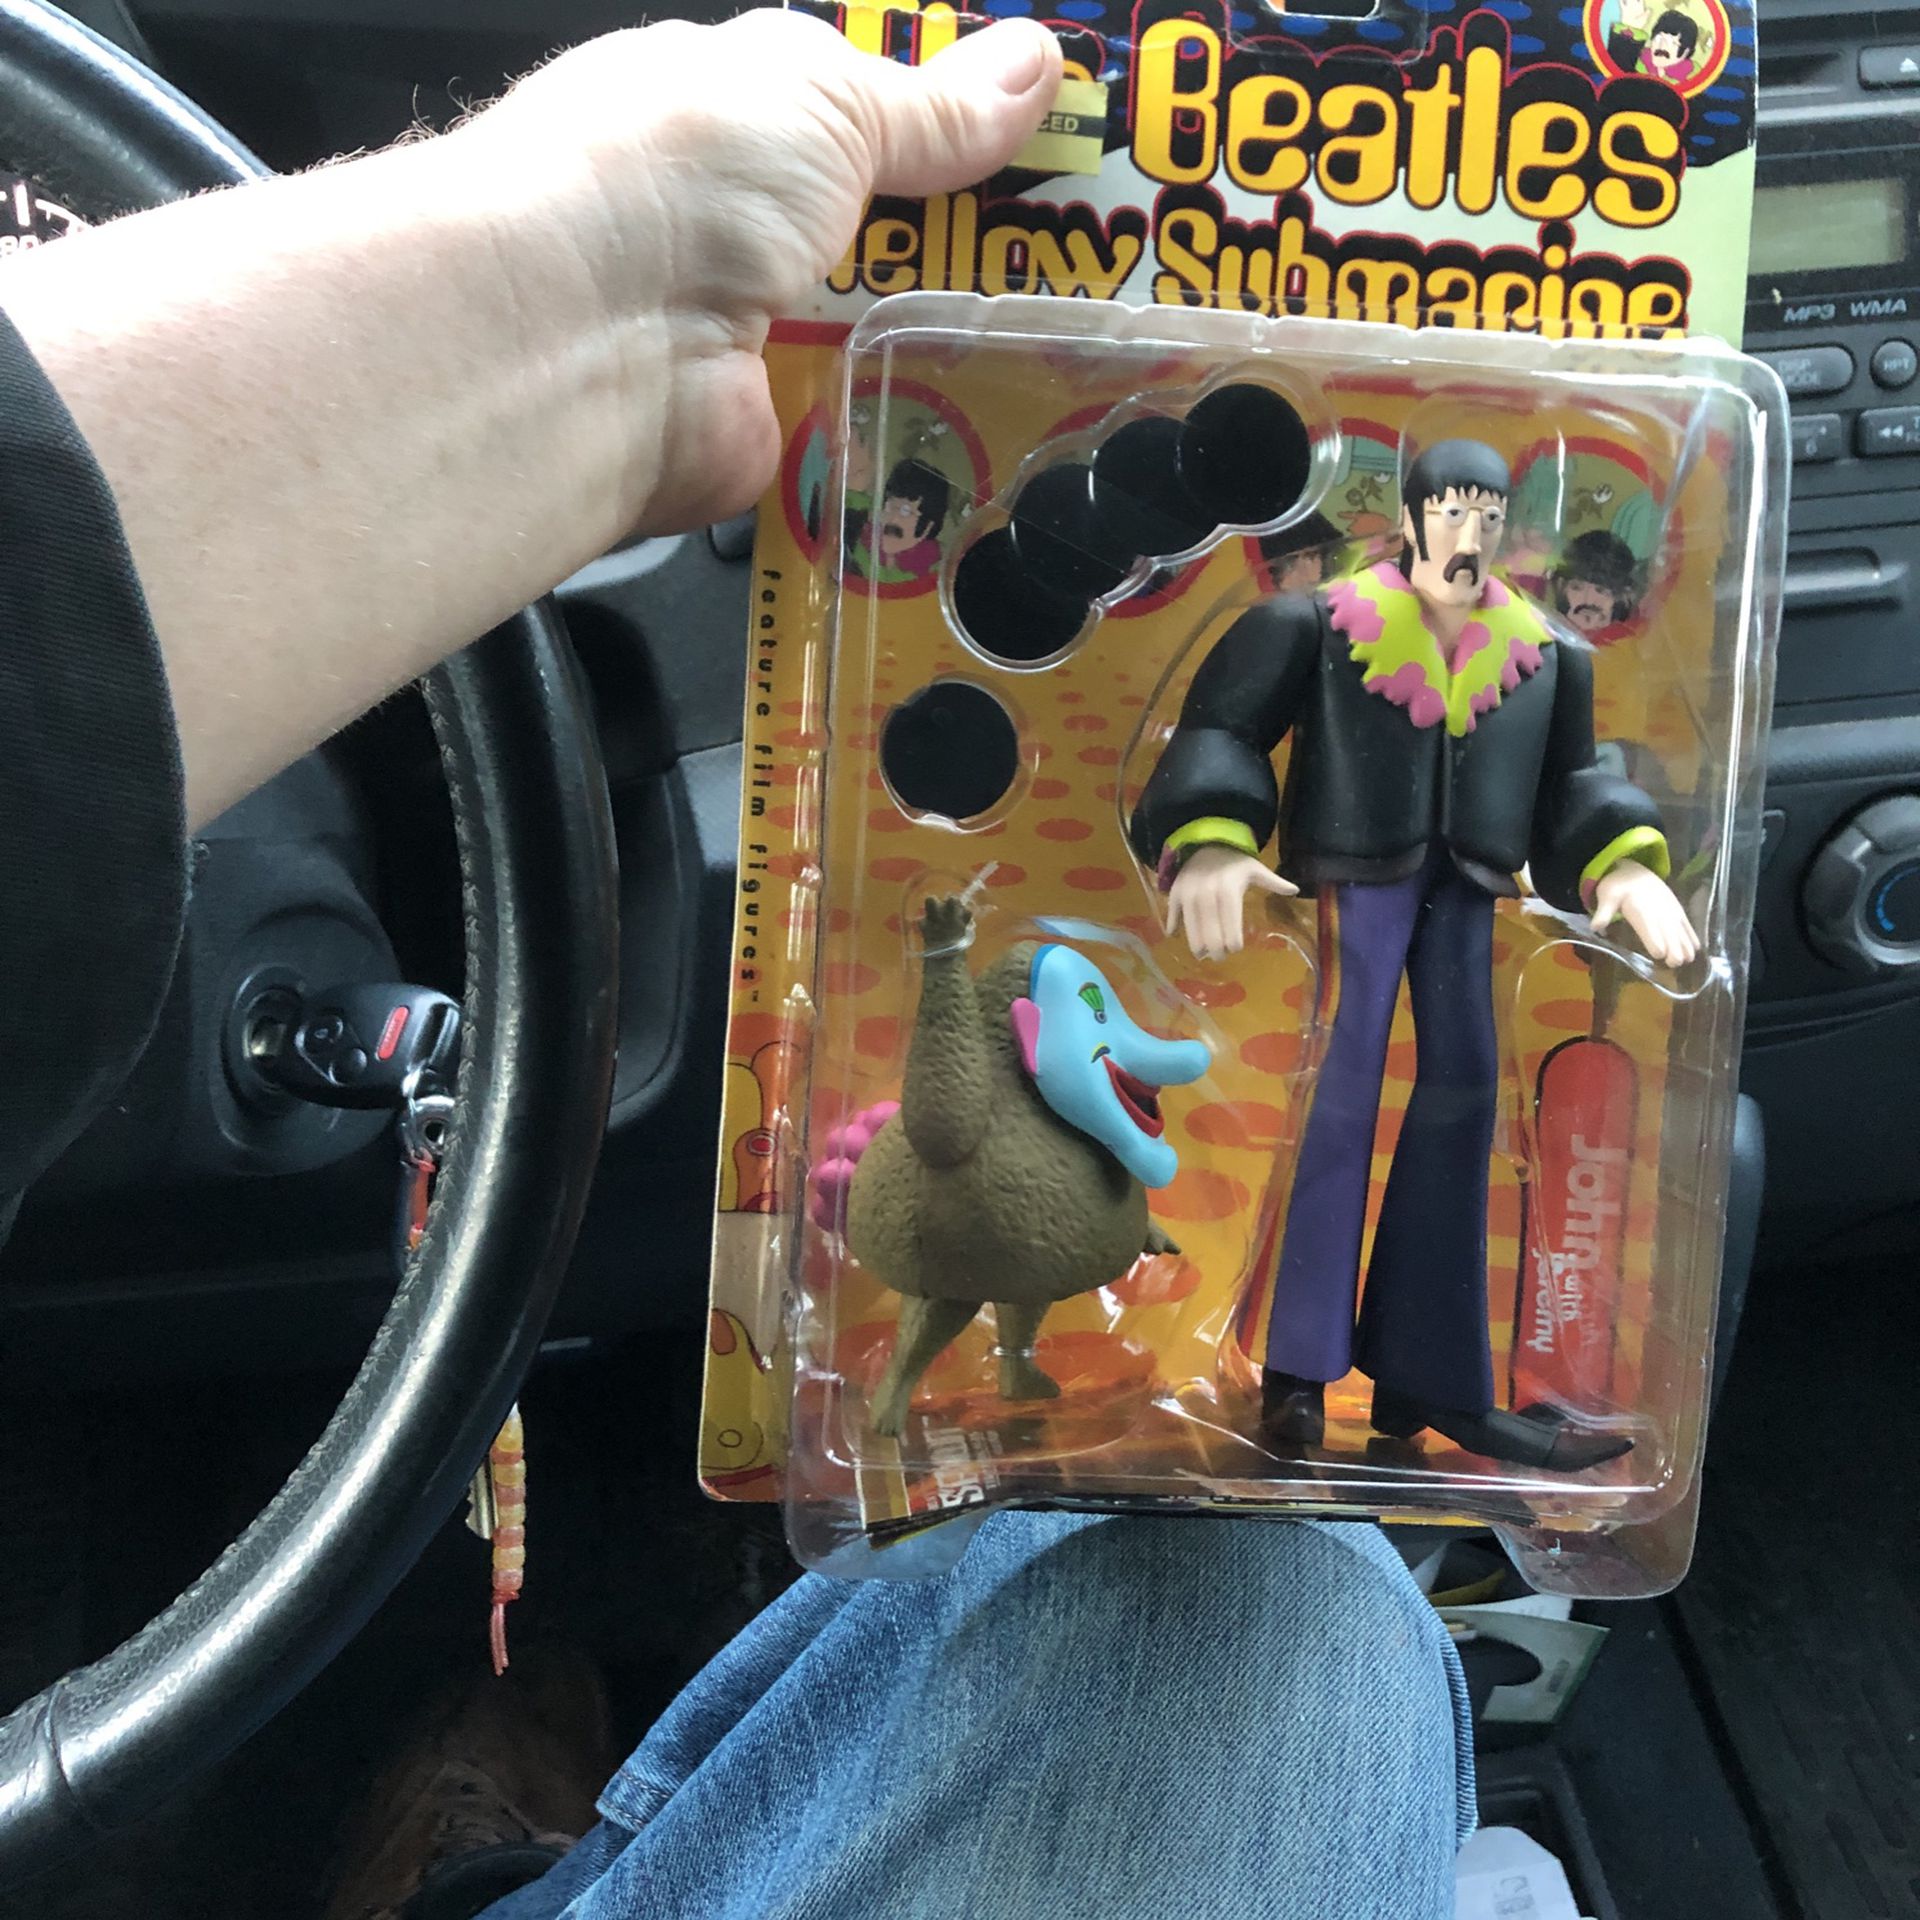 Beatles action figure toy